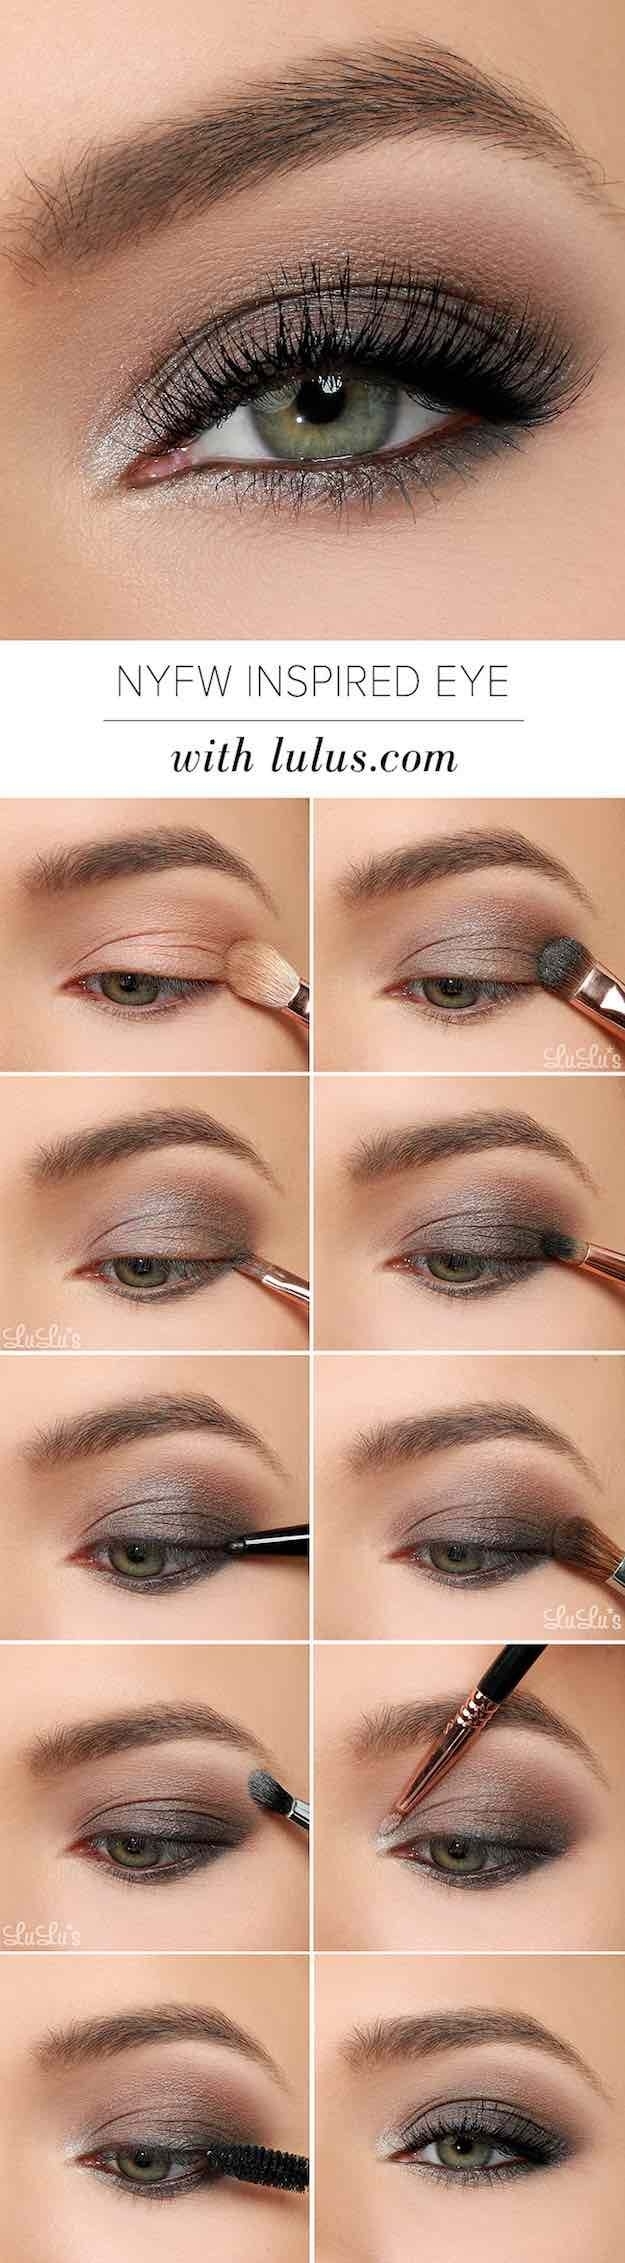 50 Perfect Makeup Tutorials For Green Eyes | Smoky Eye for How To Apply Smokey Eye Makeup For Green Eyes